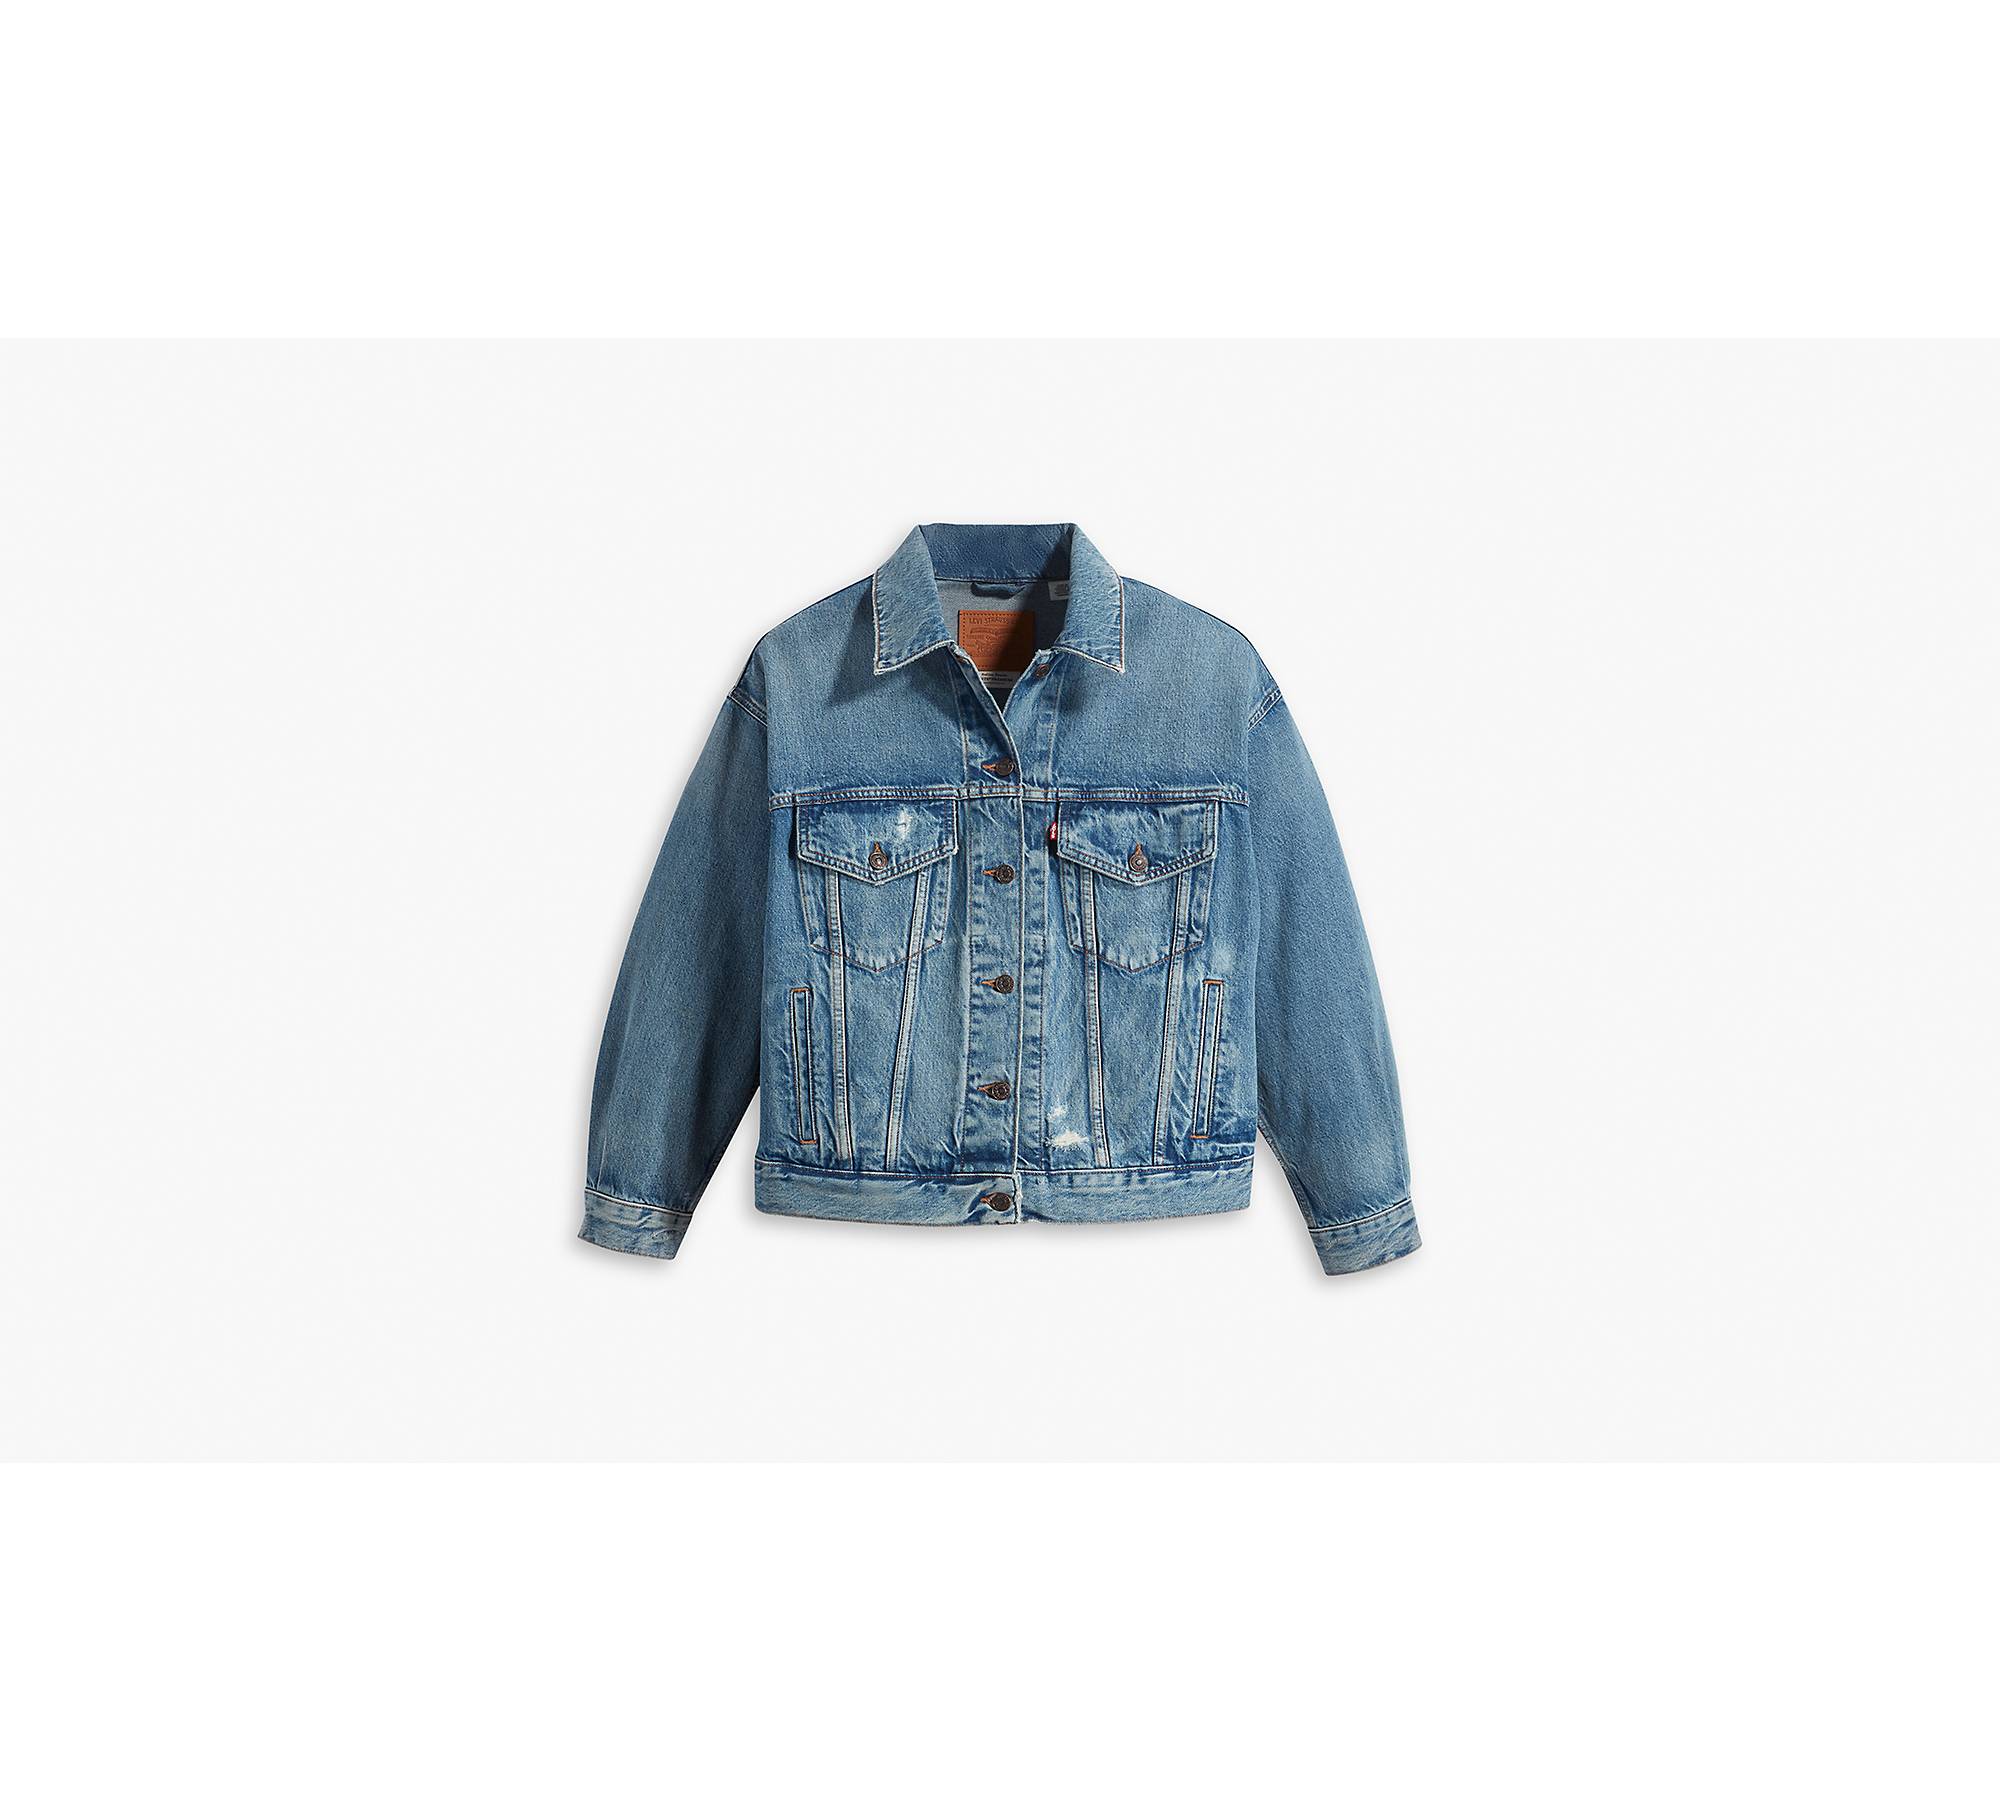 Which size should I pick for this Levi's Trucker Jacket: M or L